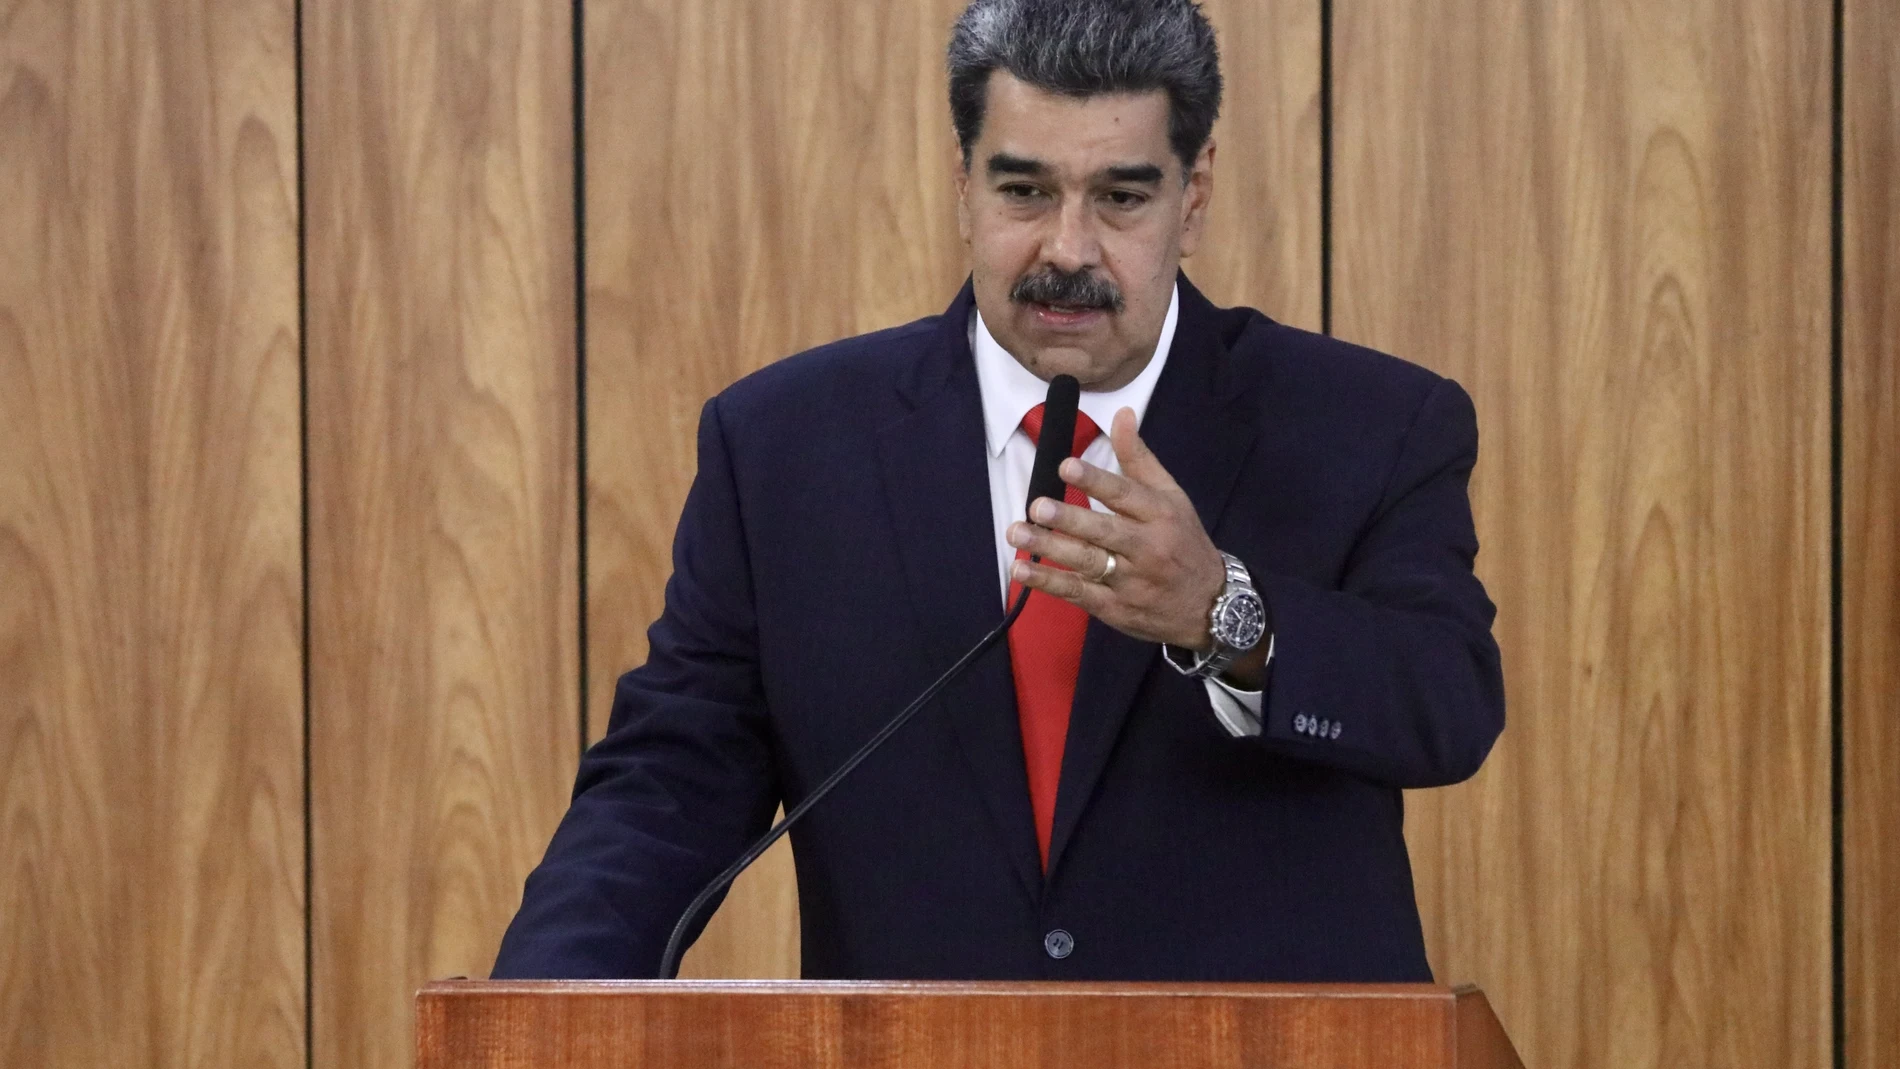 May 29, 2023, Brasilia, Distrito Federal, Brasil: (INT) Press Conference with Maduro, President of Venezuela. May 29, 2023, Brasilia, Federal District, Brazil: The President of Venezuela, Nicolas Maduro, during a press conference alongside the President of Brazil, Luiz Inacio Lula da Silva, at the Planalto Palace, in Brasilia, after a reserved meeting between the two..Credit: Frederico Brasil/Thenews2 (Foto: Frederico Brasil/Thenews2/Zumapress) (Foto de ARCHIVO) 29/05/2023